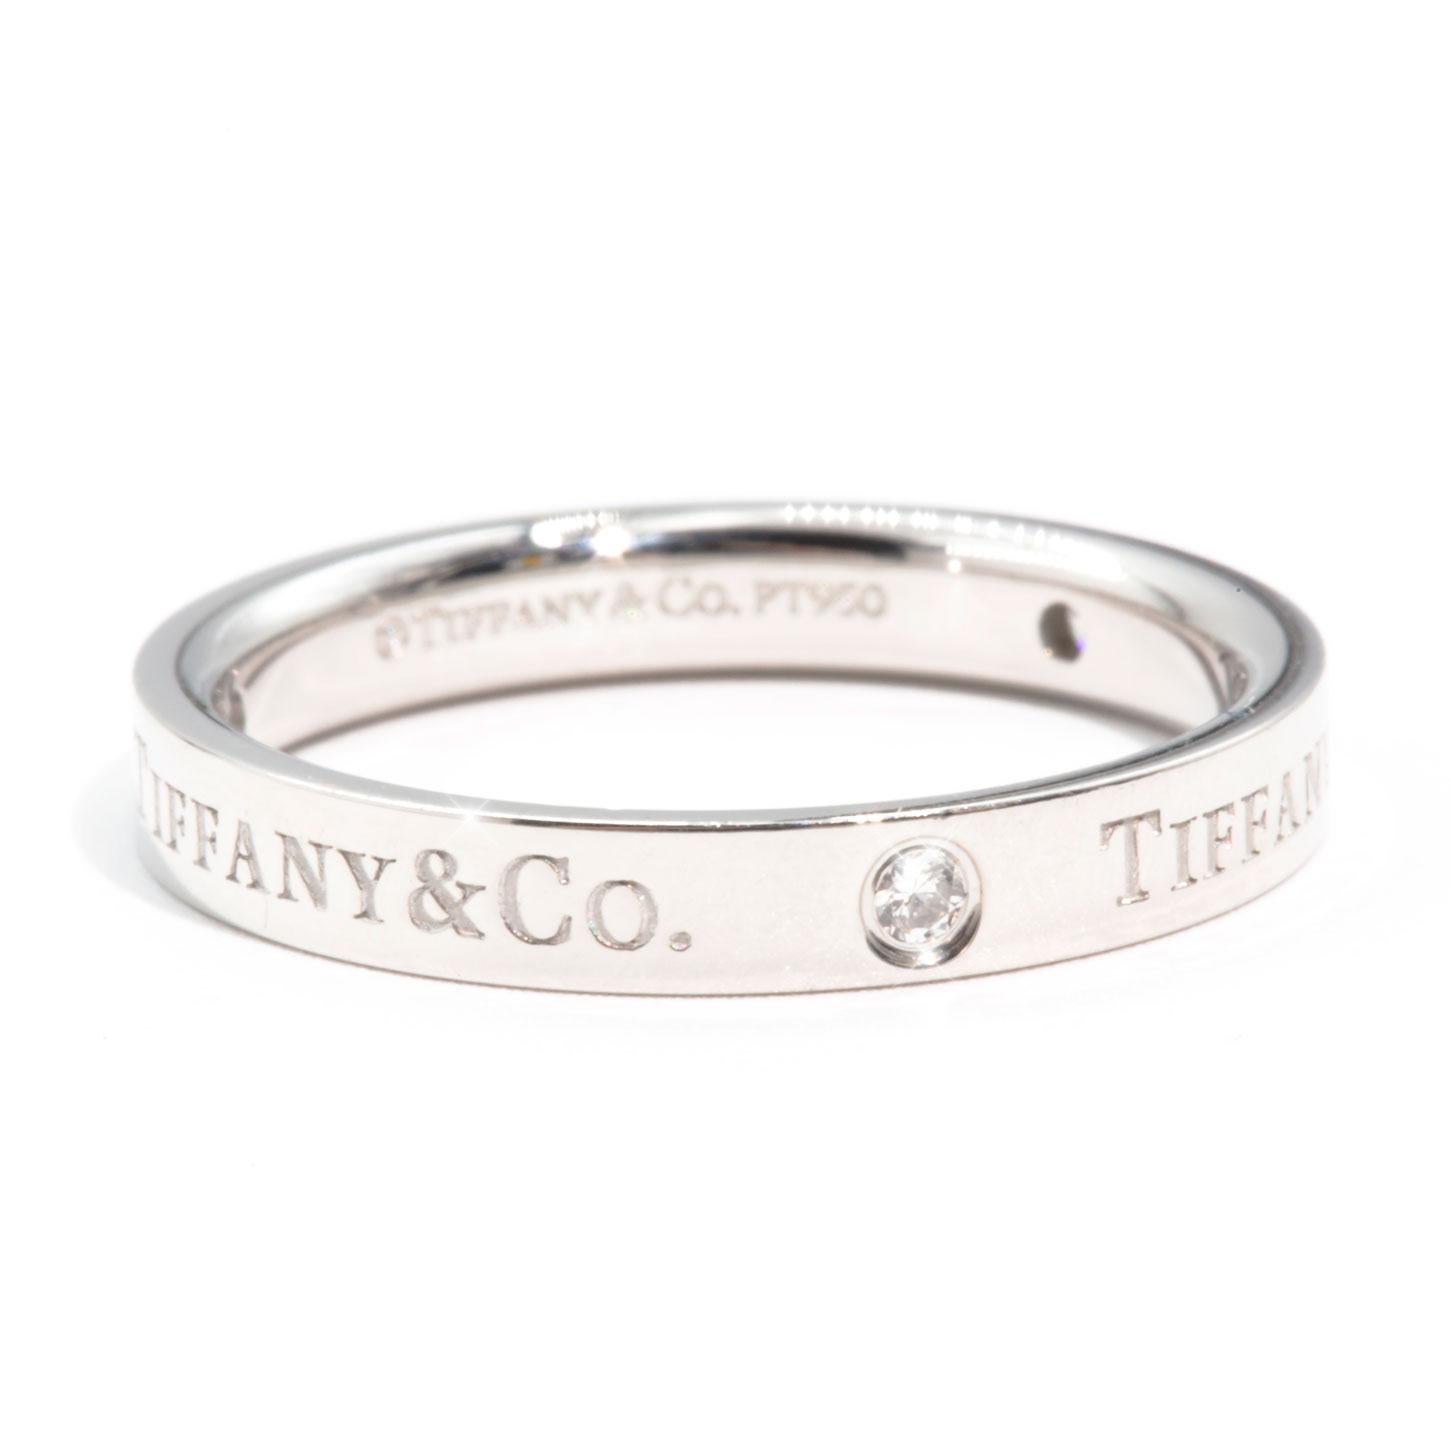 Crafted in Platinum is this genuine Tiffany & Co Diamond Band Ring. The Tiffany & Co Diamond Band Ring measures 3 millimetres with 3 round brilliant diamonds.  A simply well made solid band that will last the test of time.  This ring is pre-loved